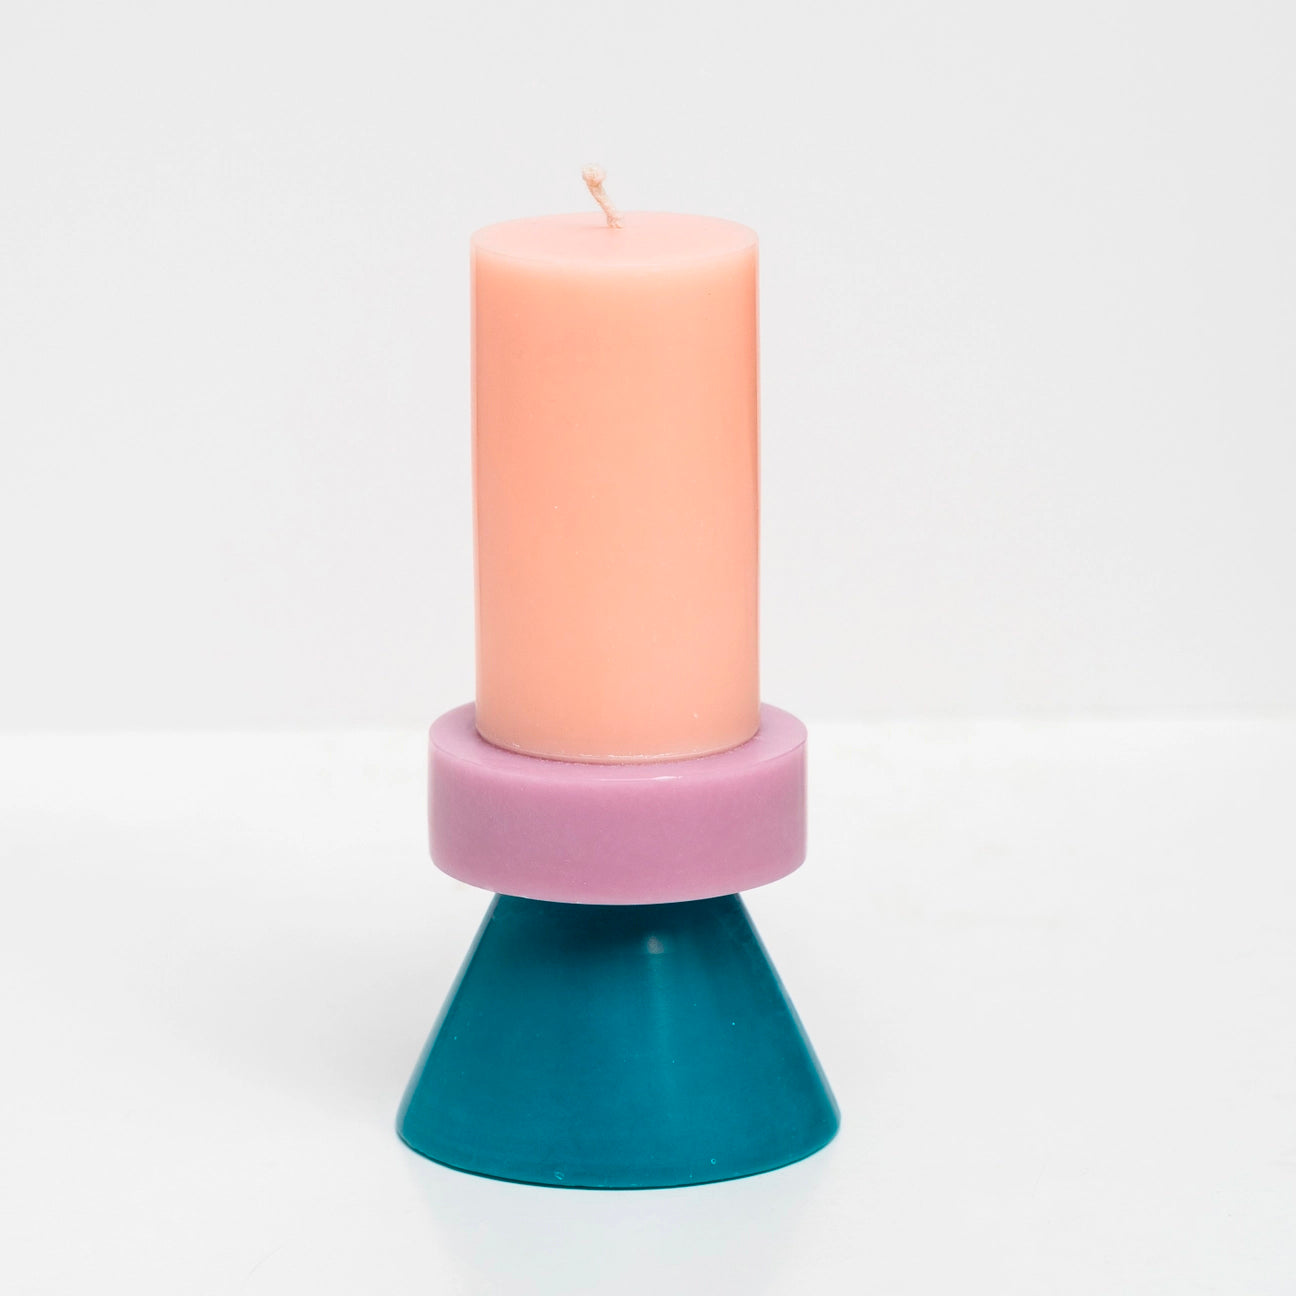 Tall Stack Candle  Colour - Blush/Pastel Purple/Teal